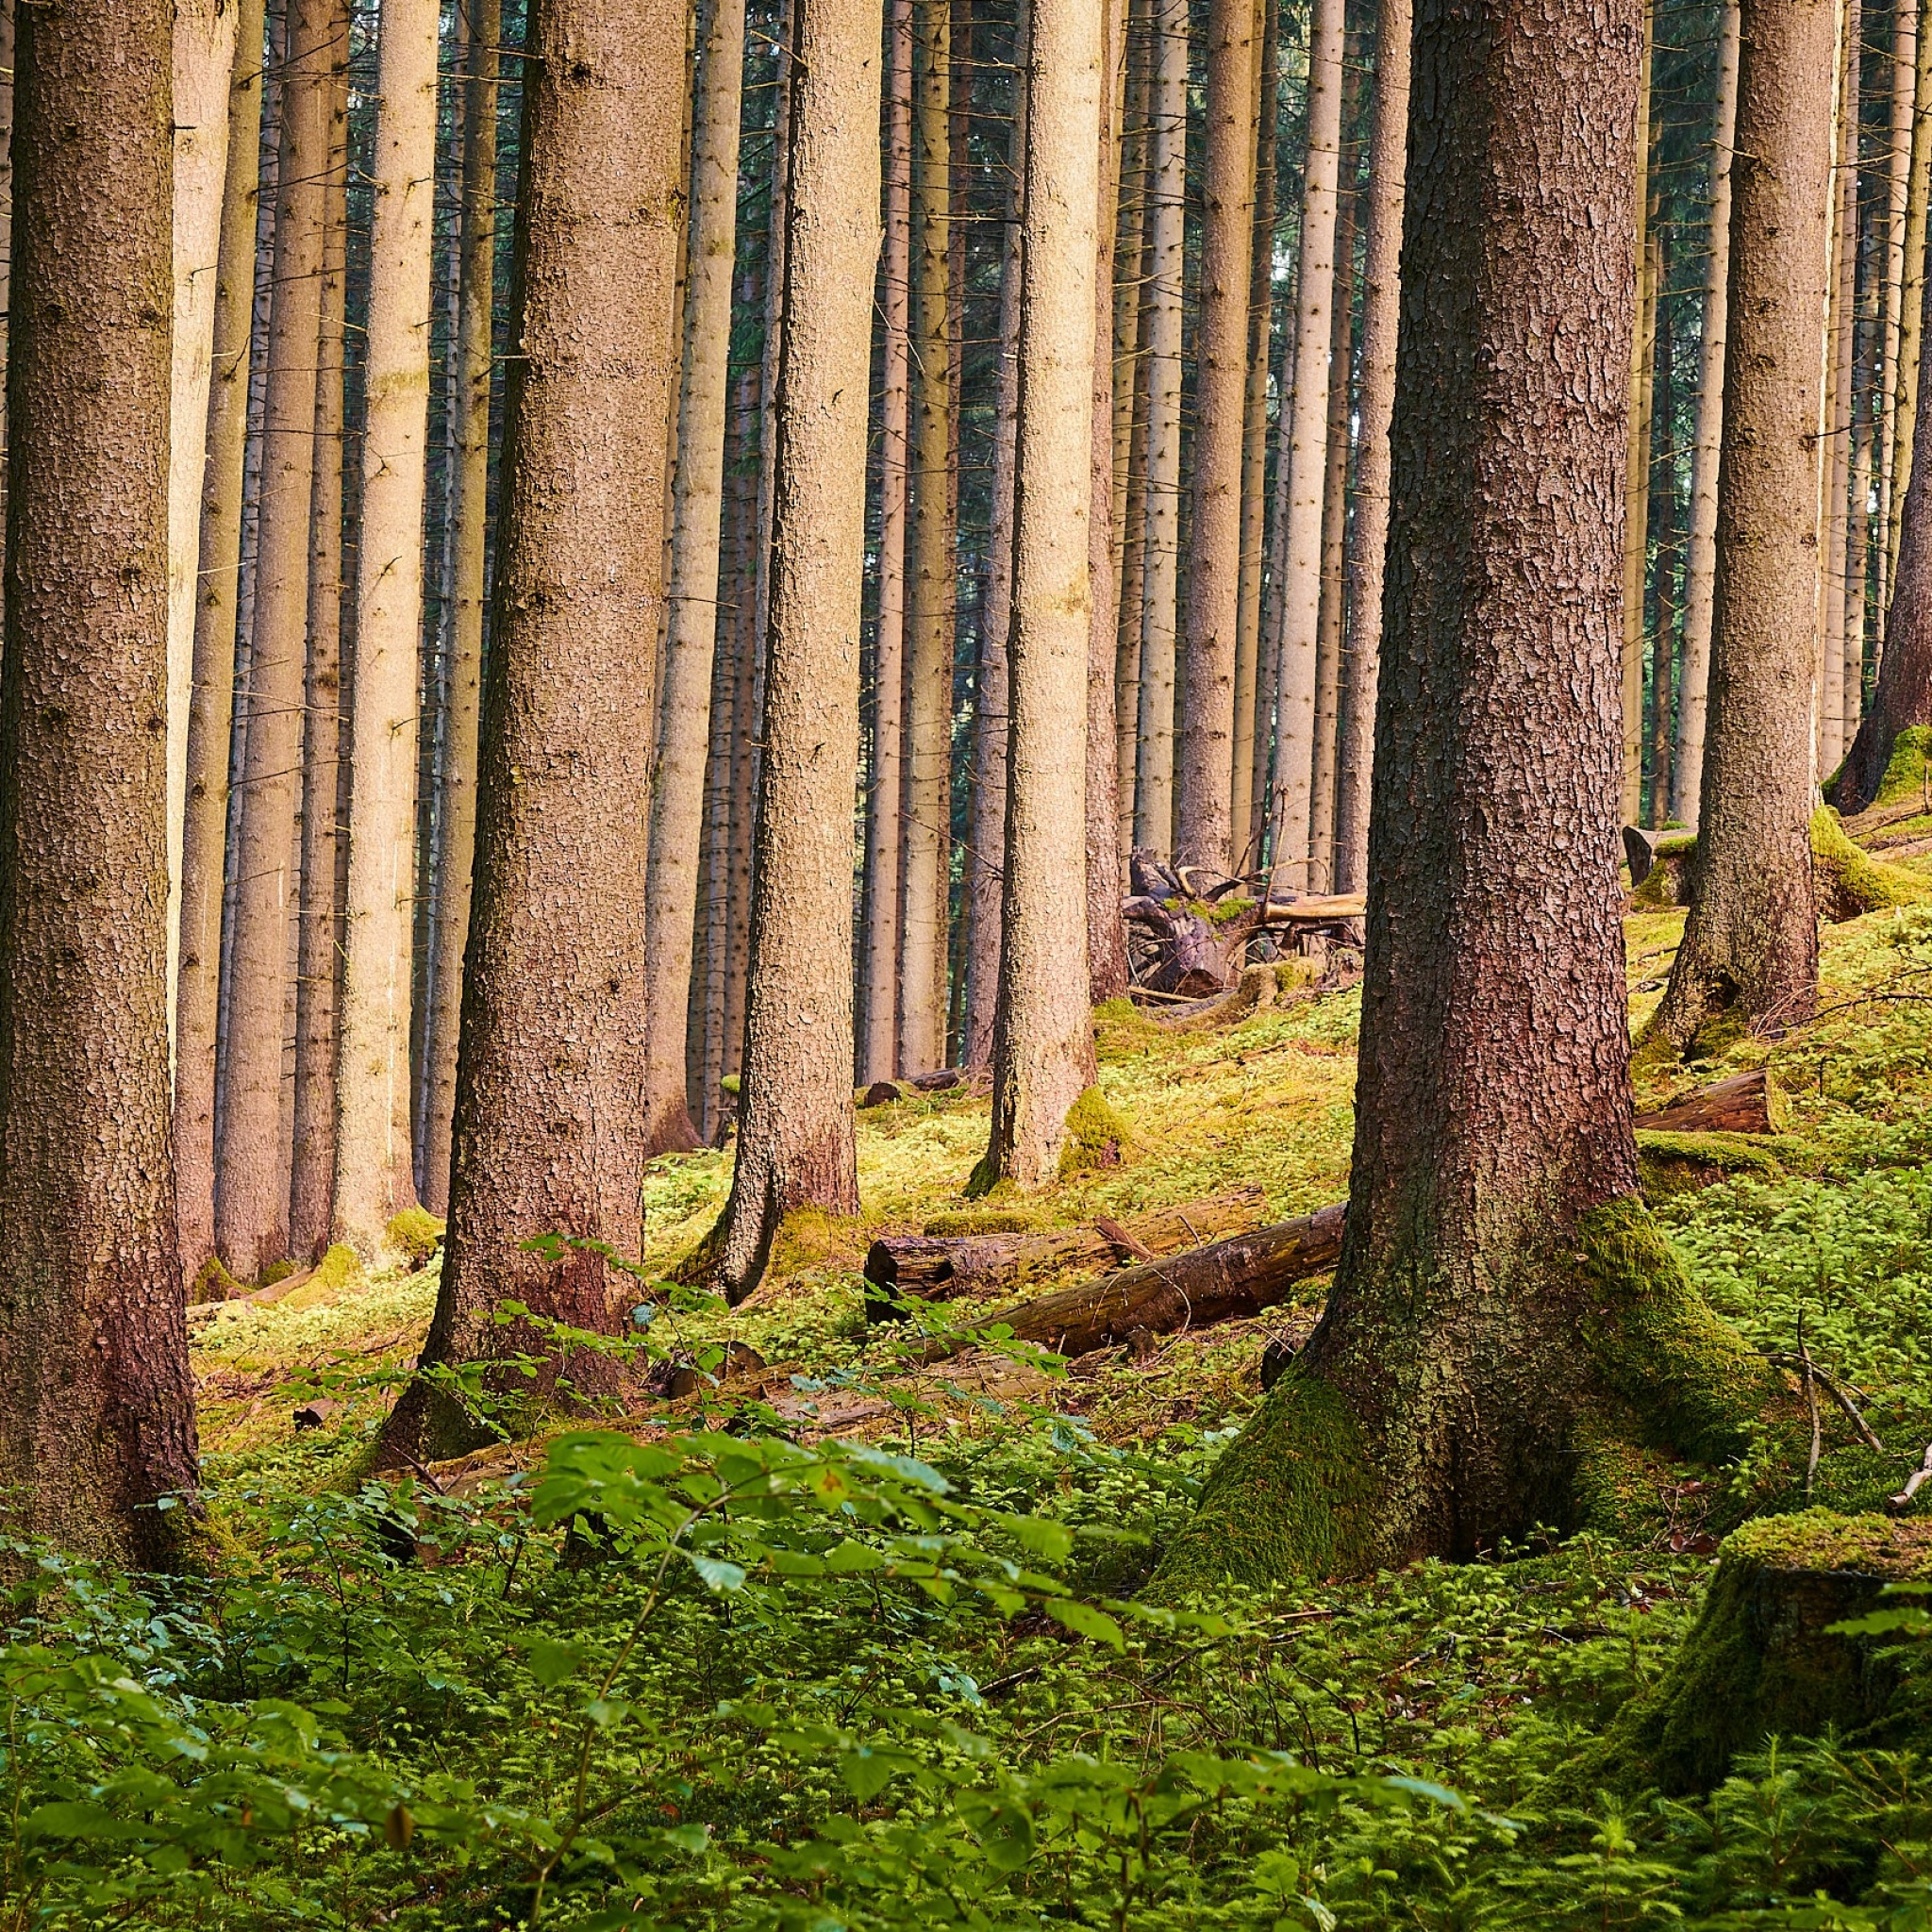 Tree Trunks 4K Wallpaper, Forest, Greenery, Outdoor, Daytime, Woods, Nature, #2148